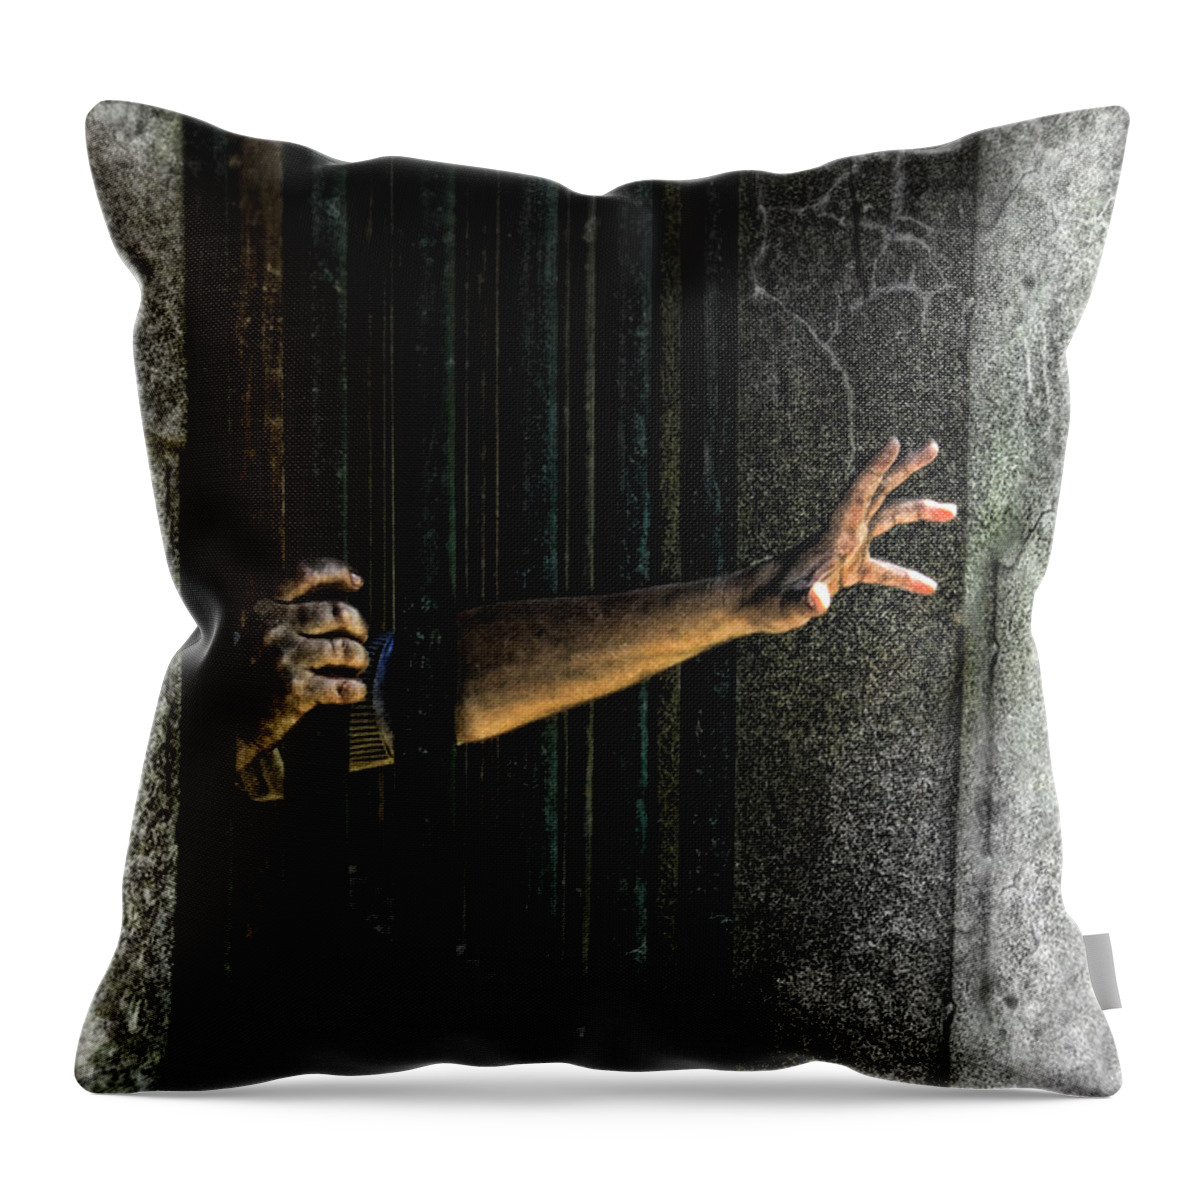 Hands Throw Pillow featuring the photograph Caged 3 by Jill Battaglia